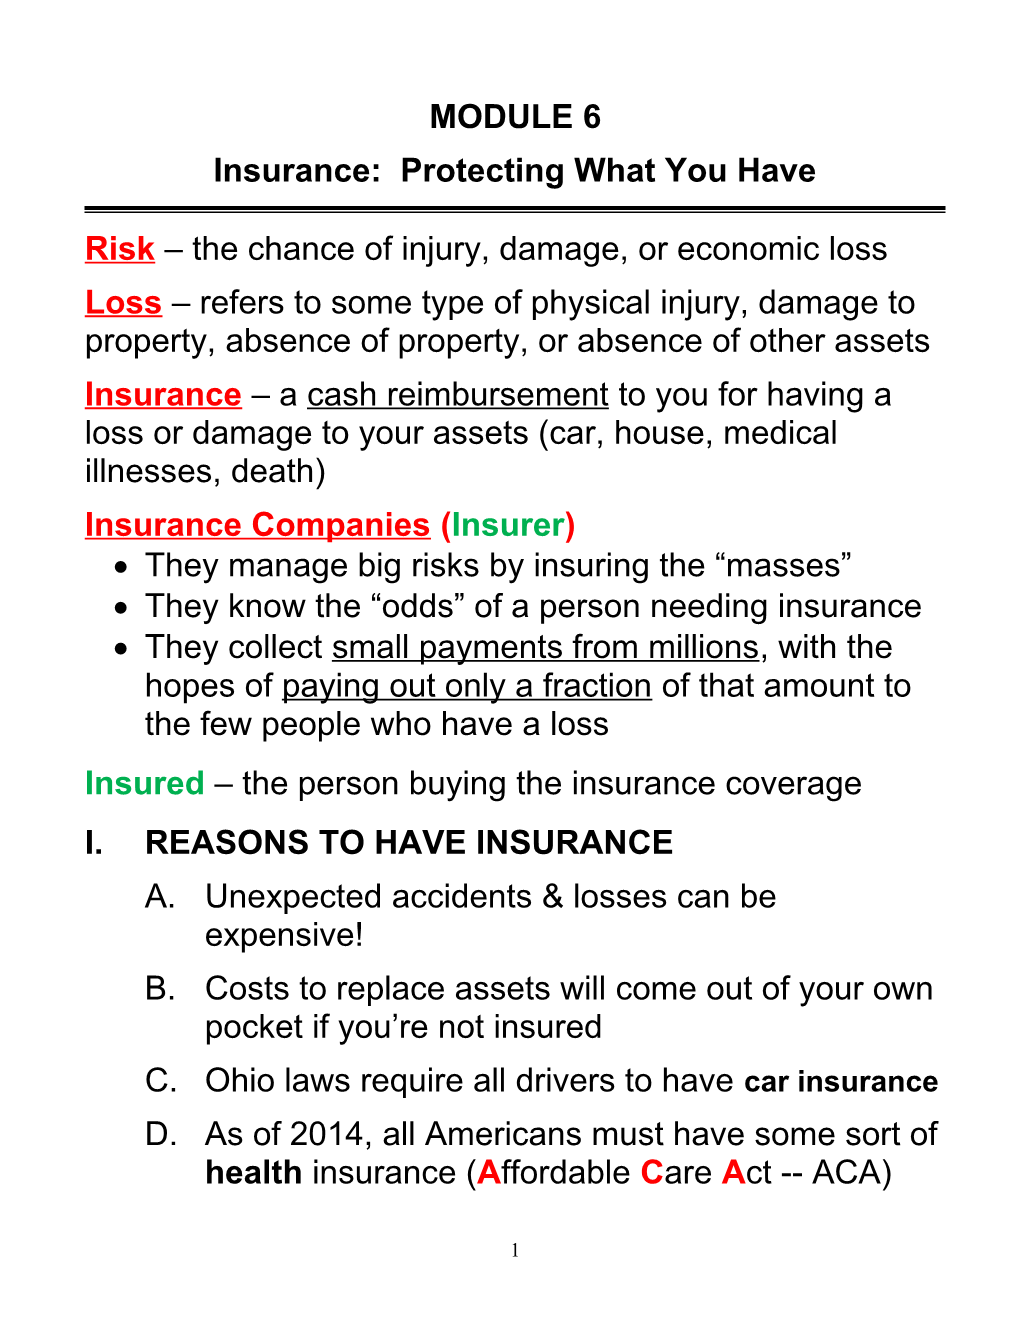 Unit 6 Insurance: Protecting What You Have